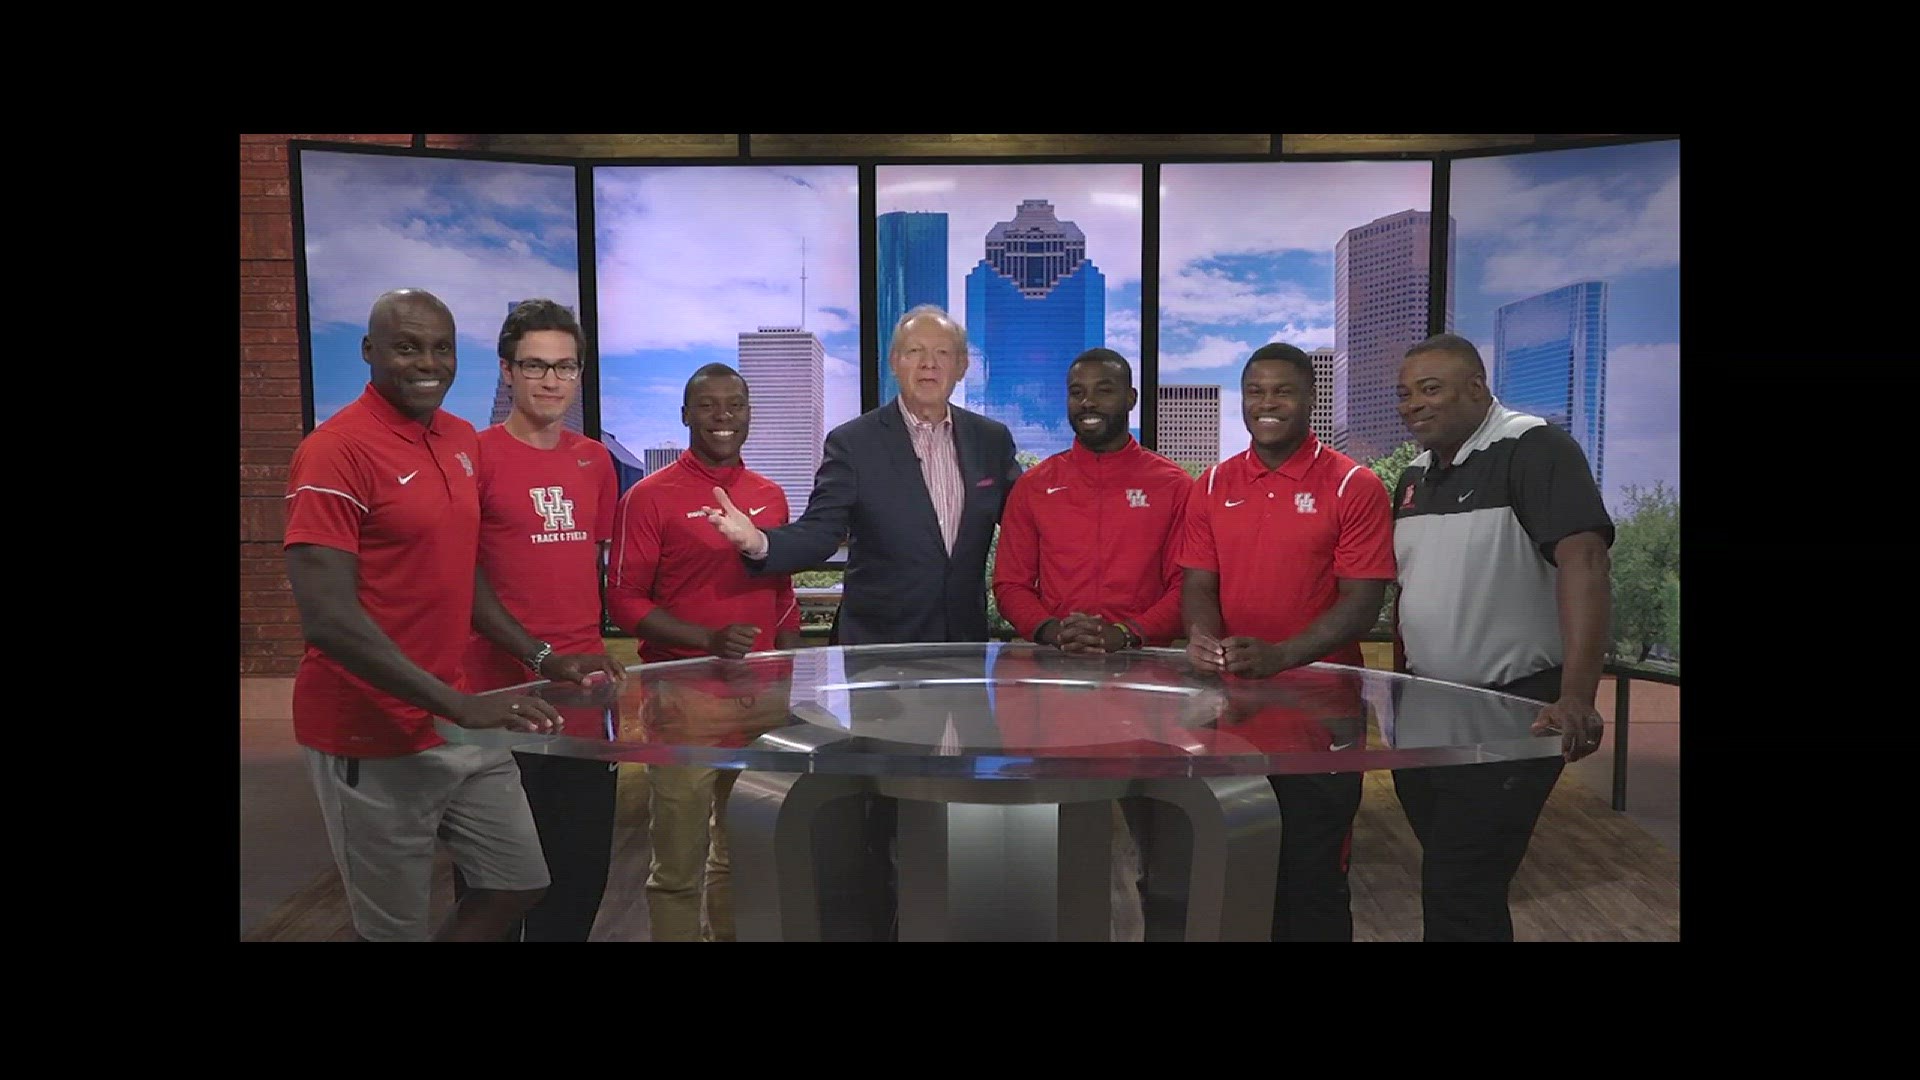 UH track team interview on heels of NCAA championship